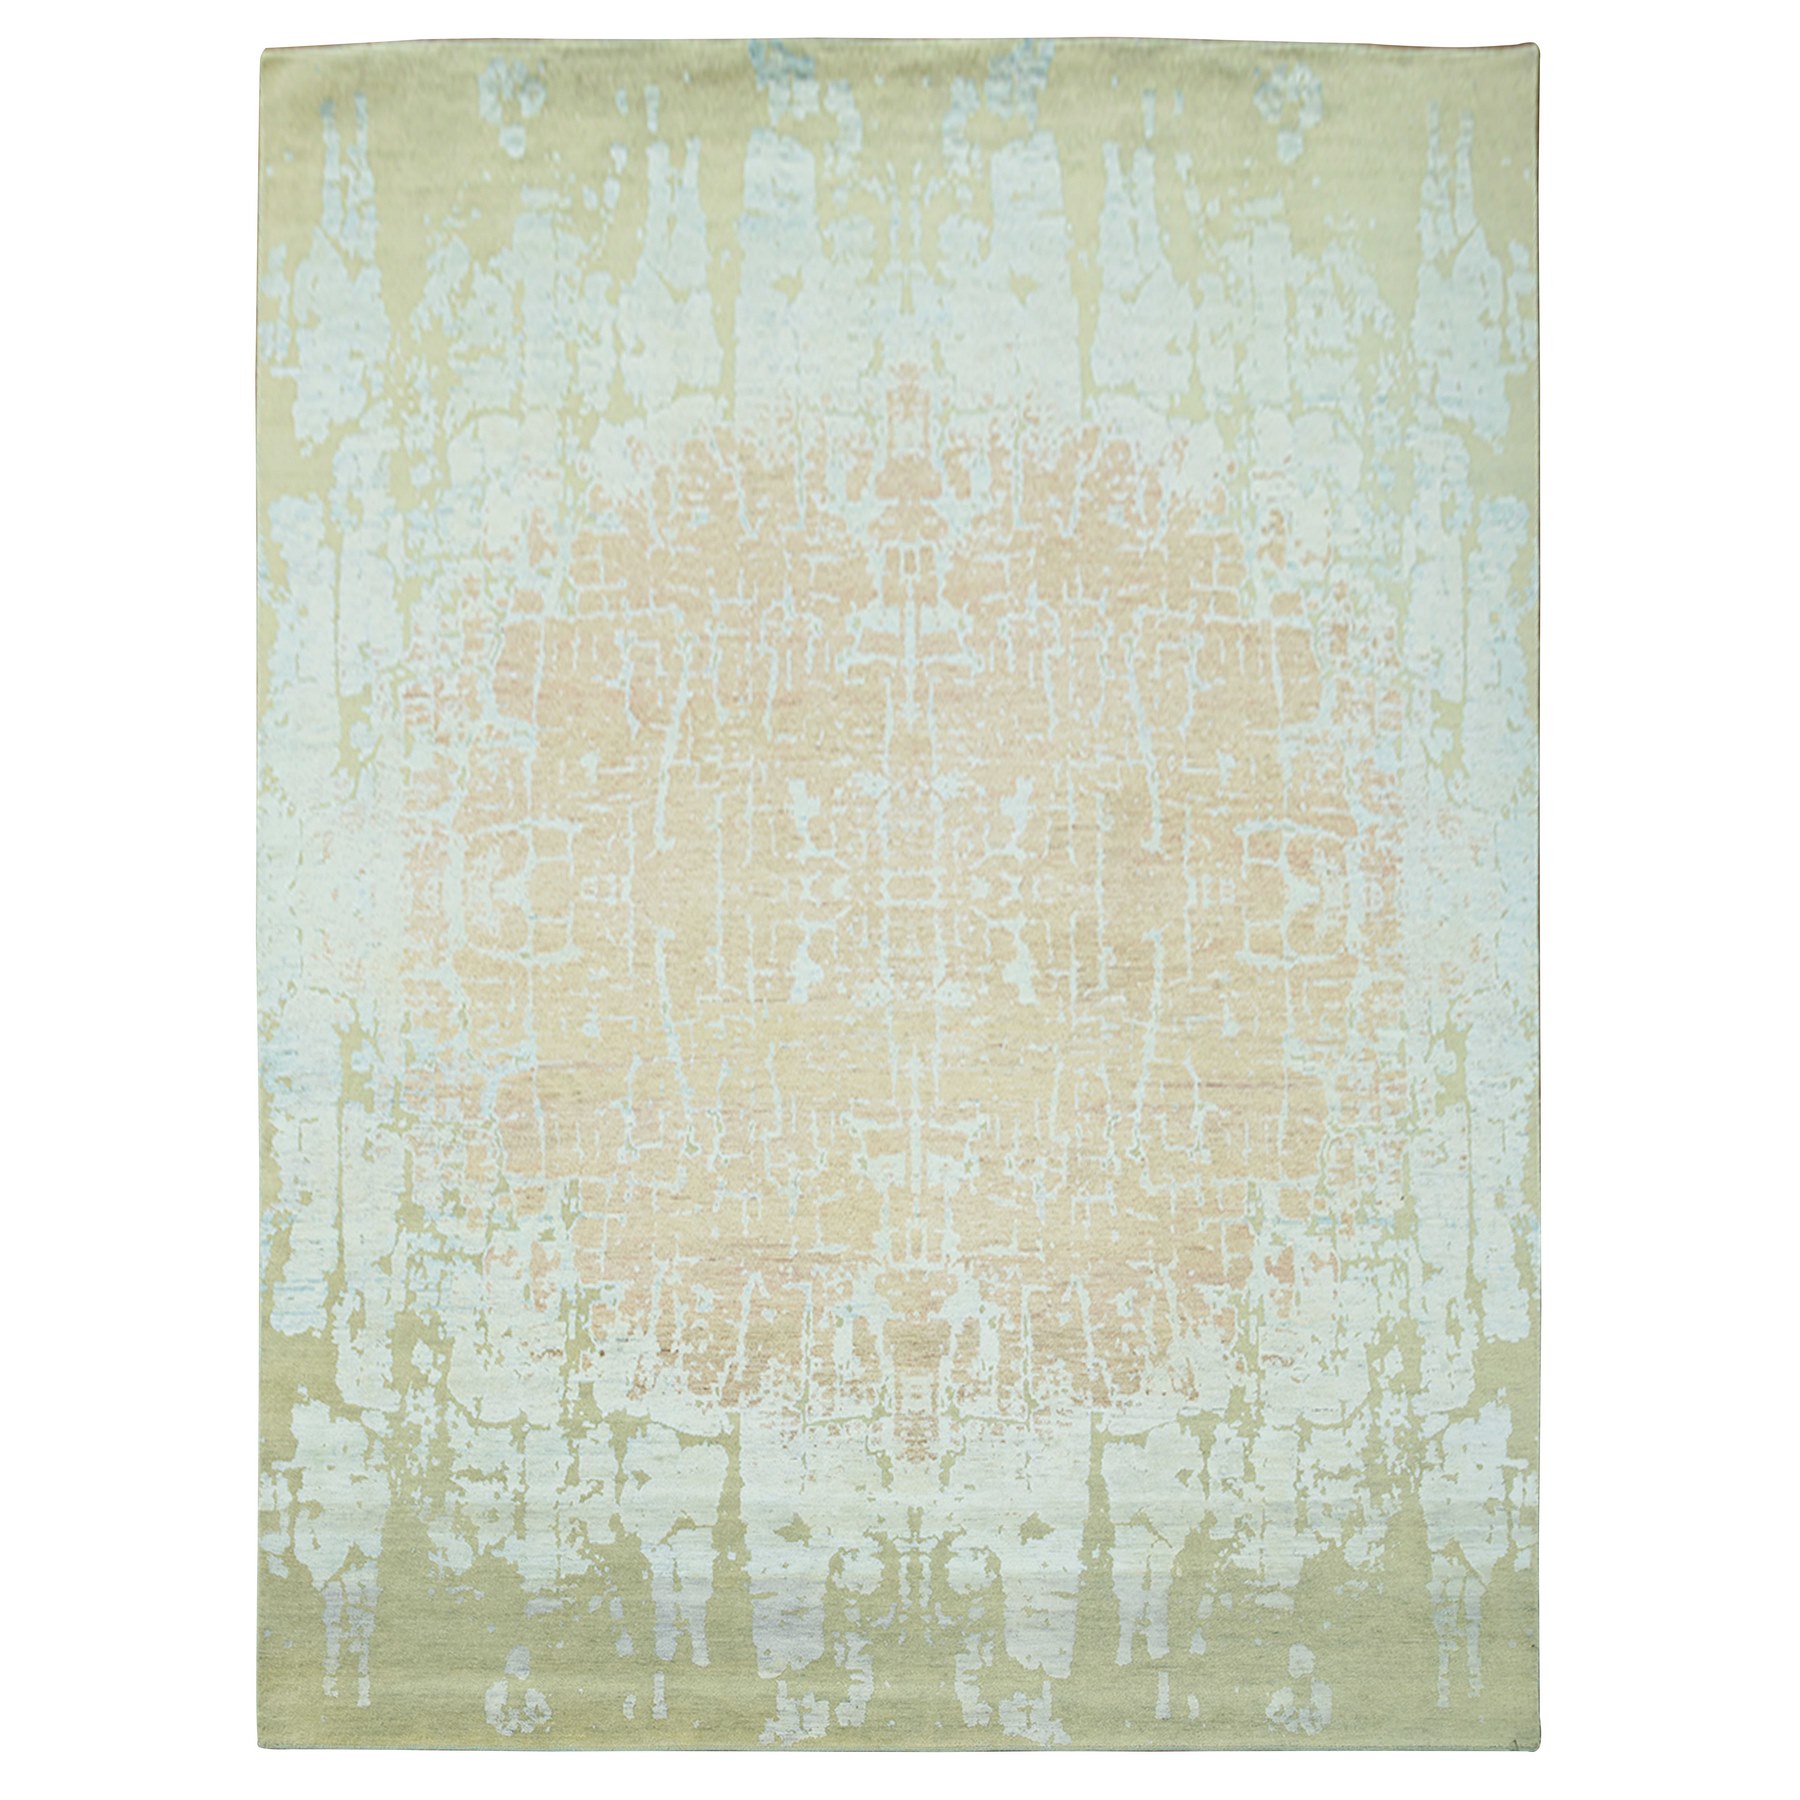 9'x11'8" Tan Color, Modern Abstract Large Center Design Tone On Tone, Wool and Silk Hand Woven, Oriental Rug 